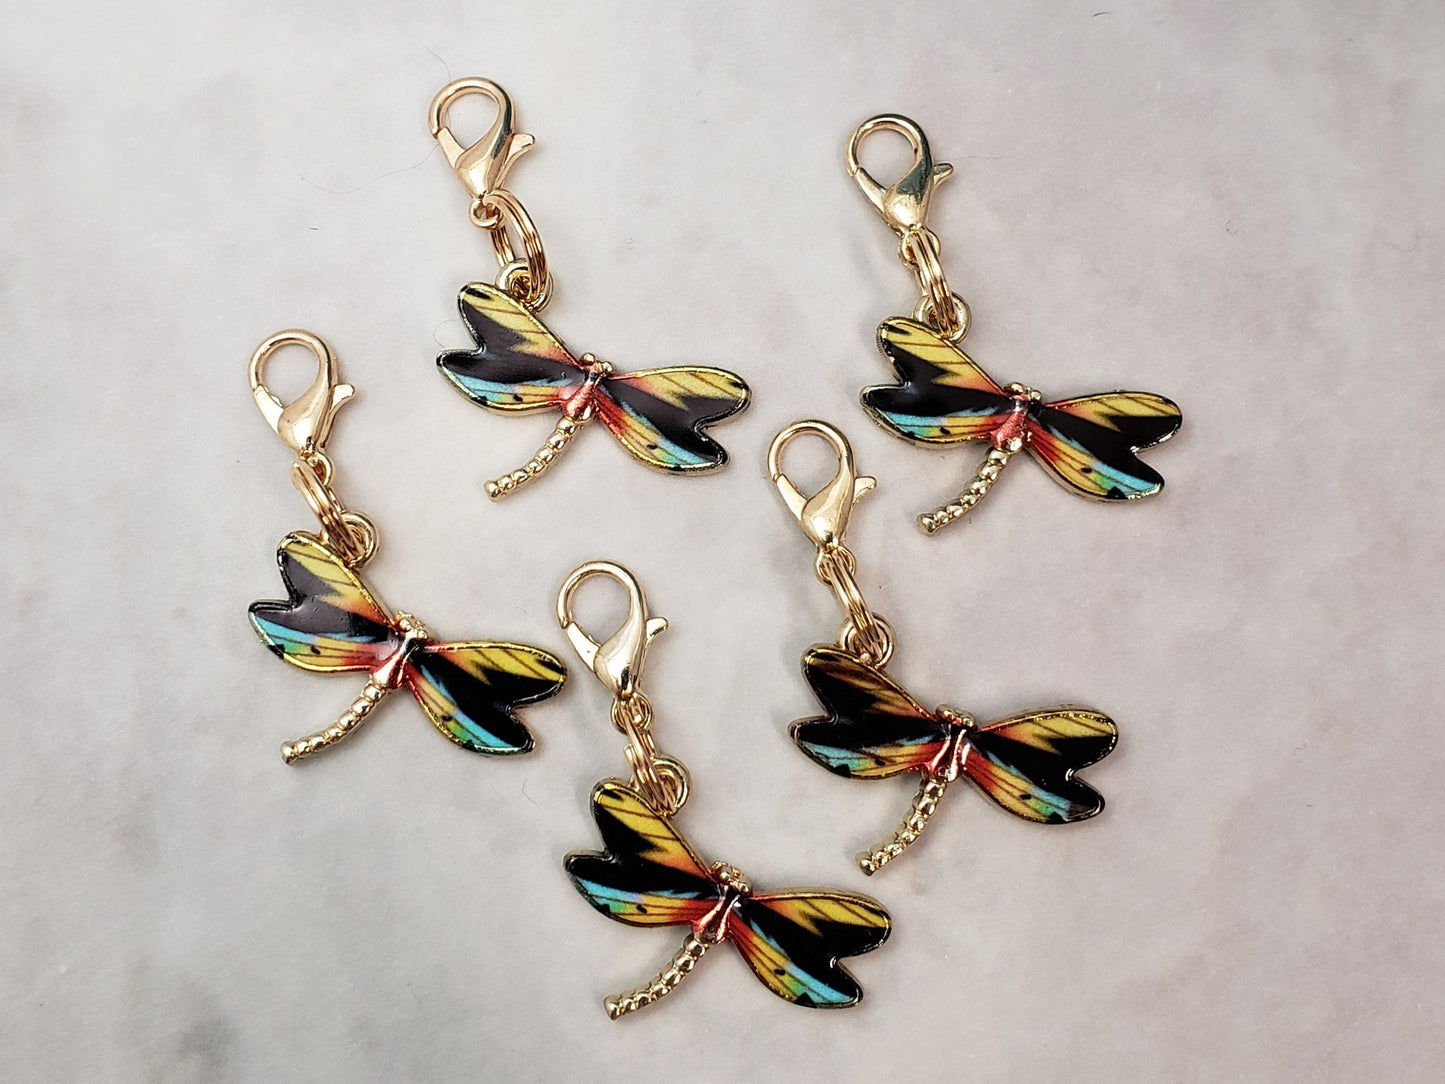 Stitch Markers for Knitting, 5pc Dragonflies | Crochet stitch marker, progress keeper, project bag charms, crochet accessory